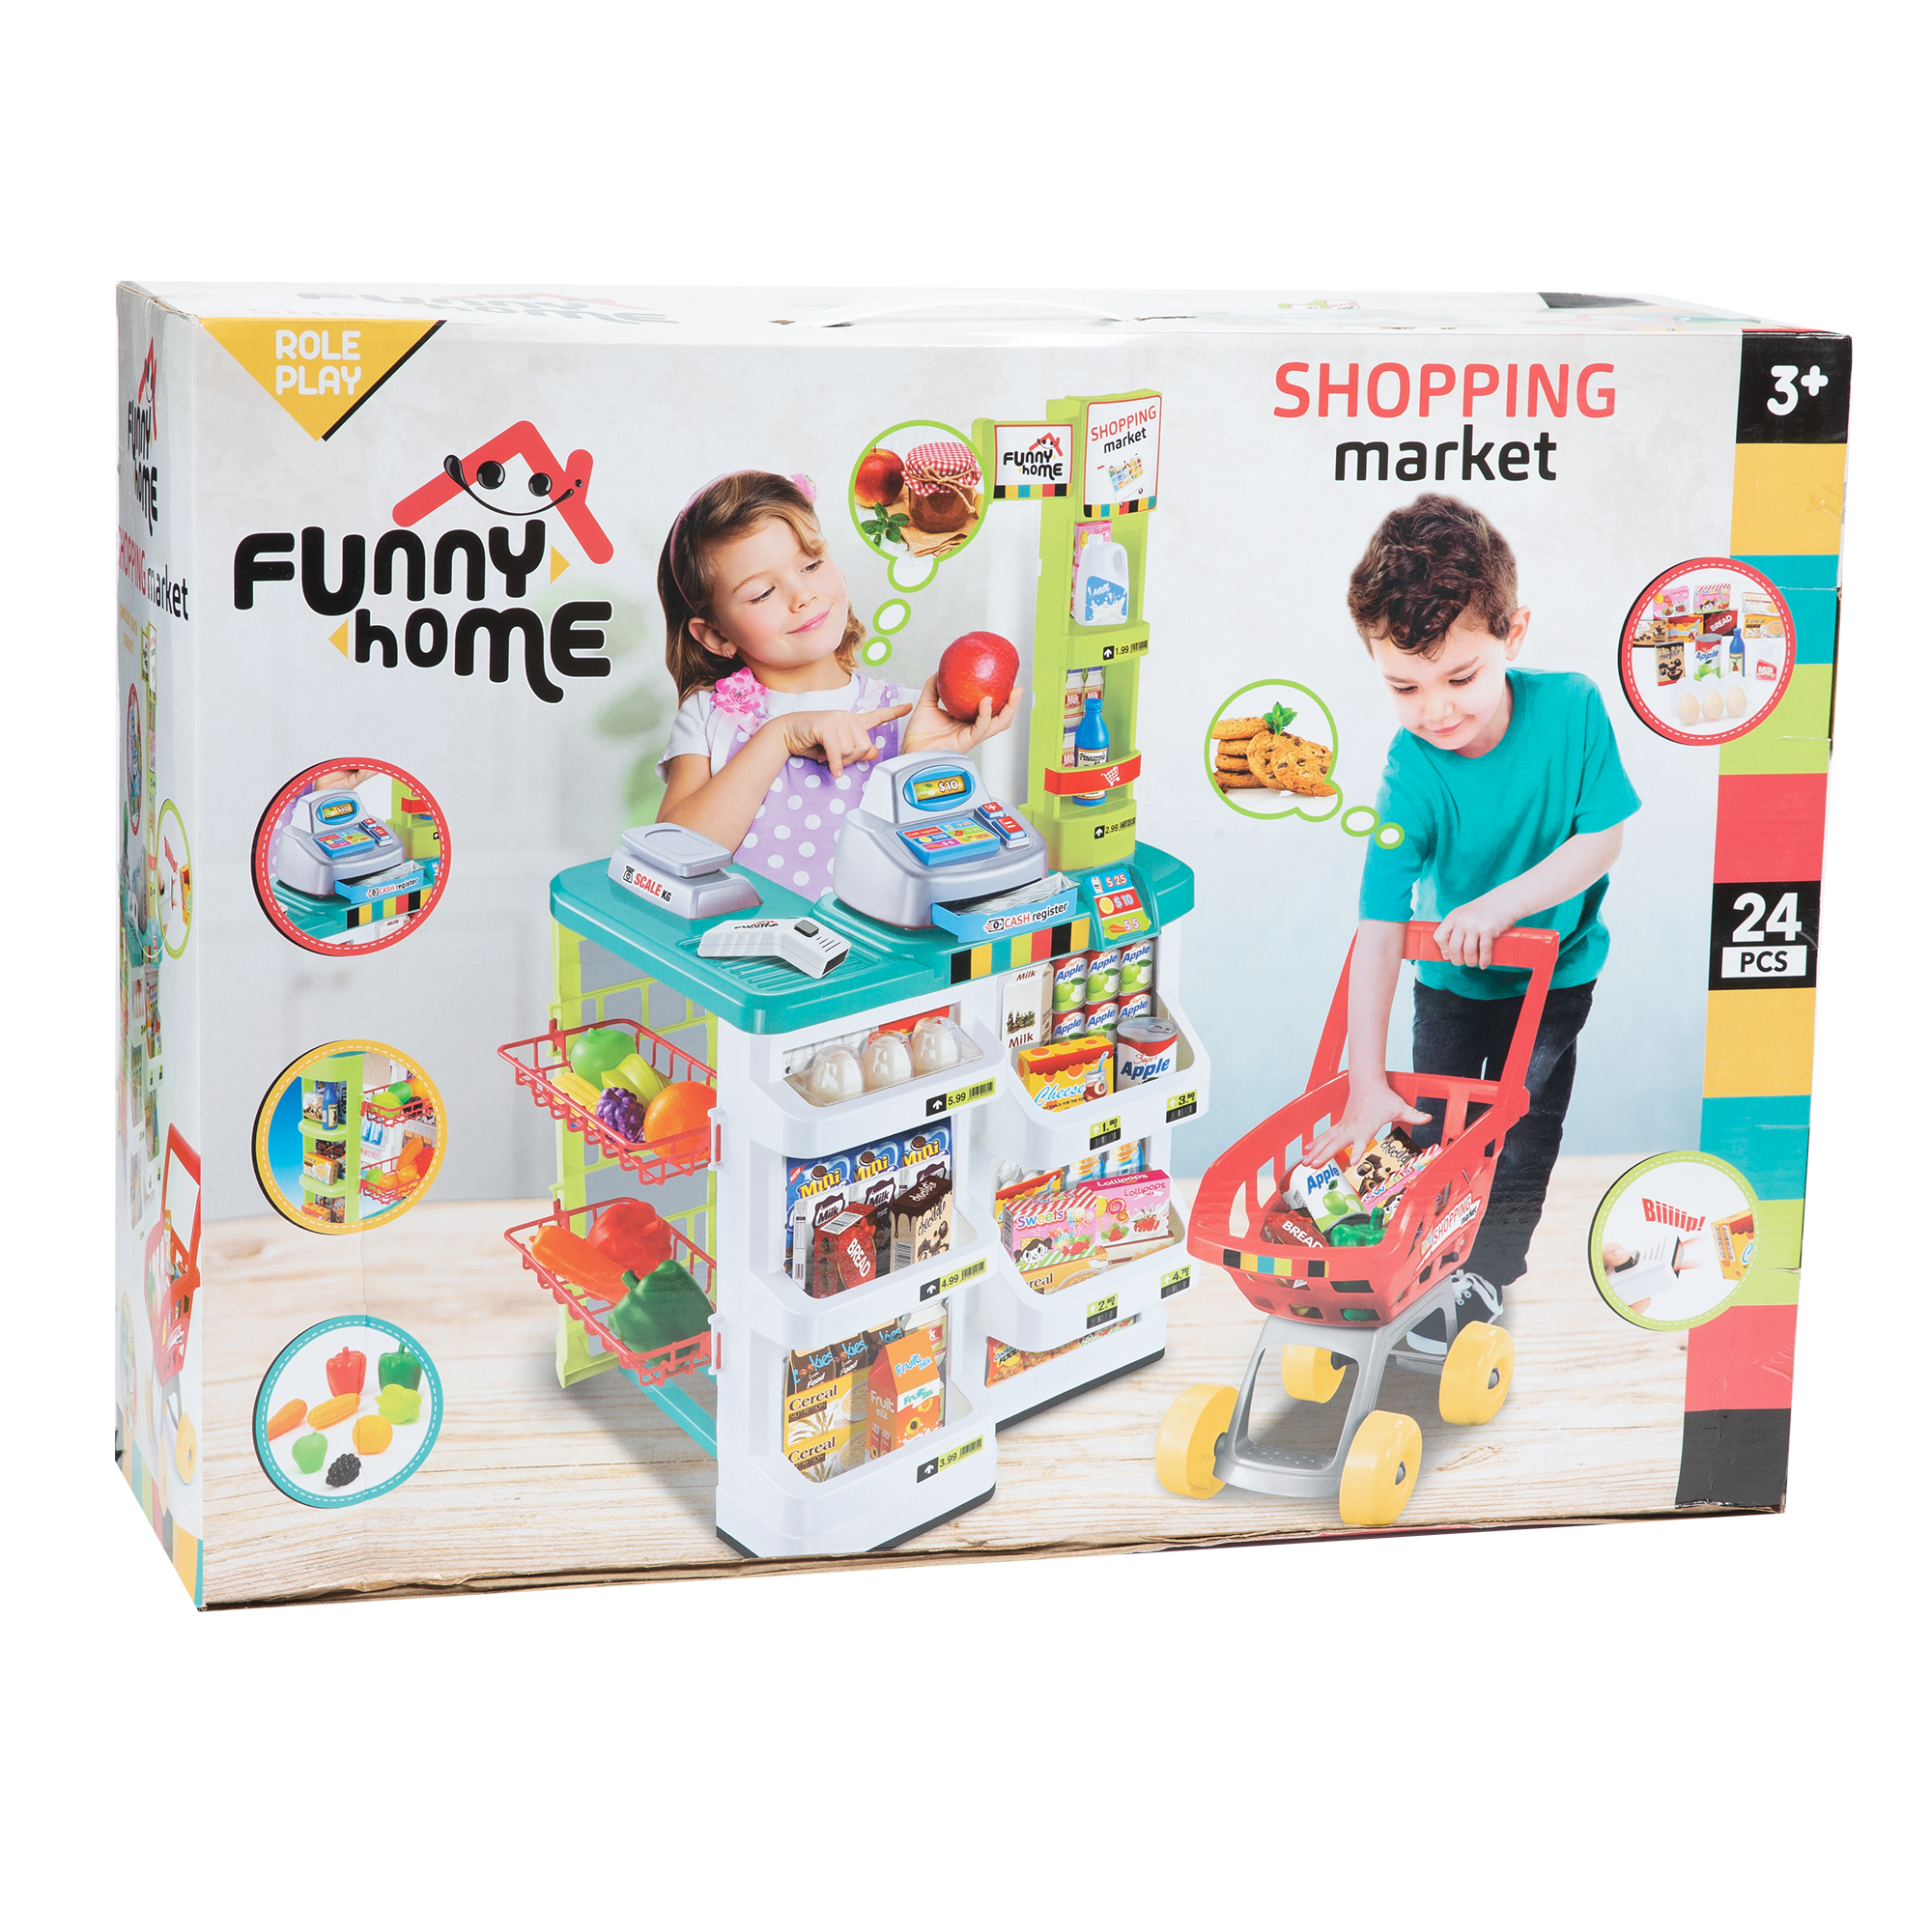 Shopping market - FUNNY HOME